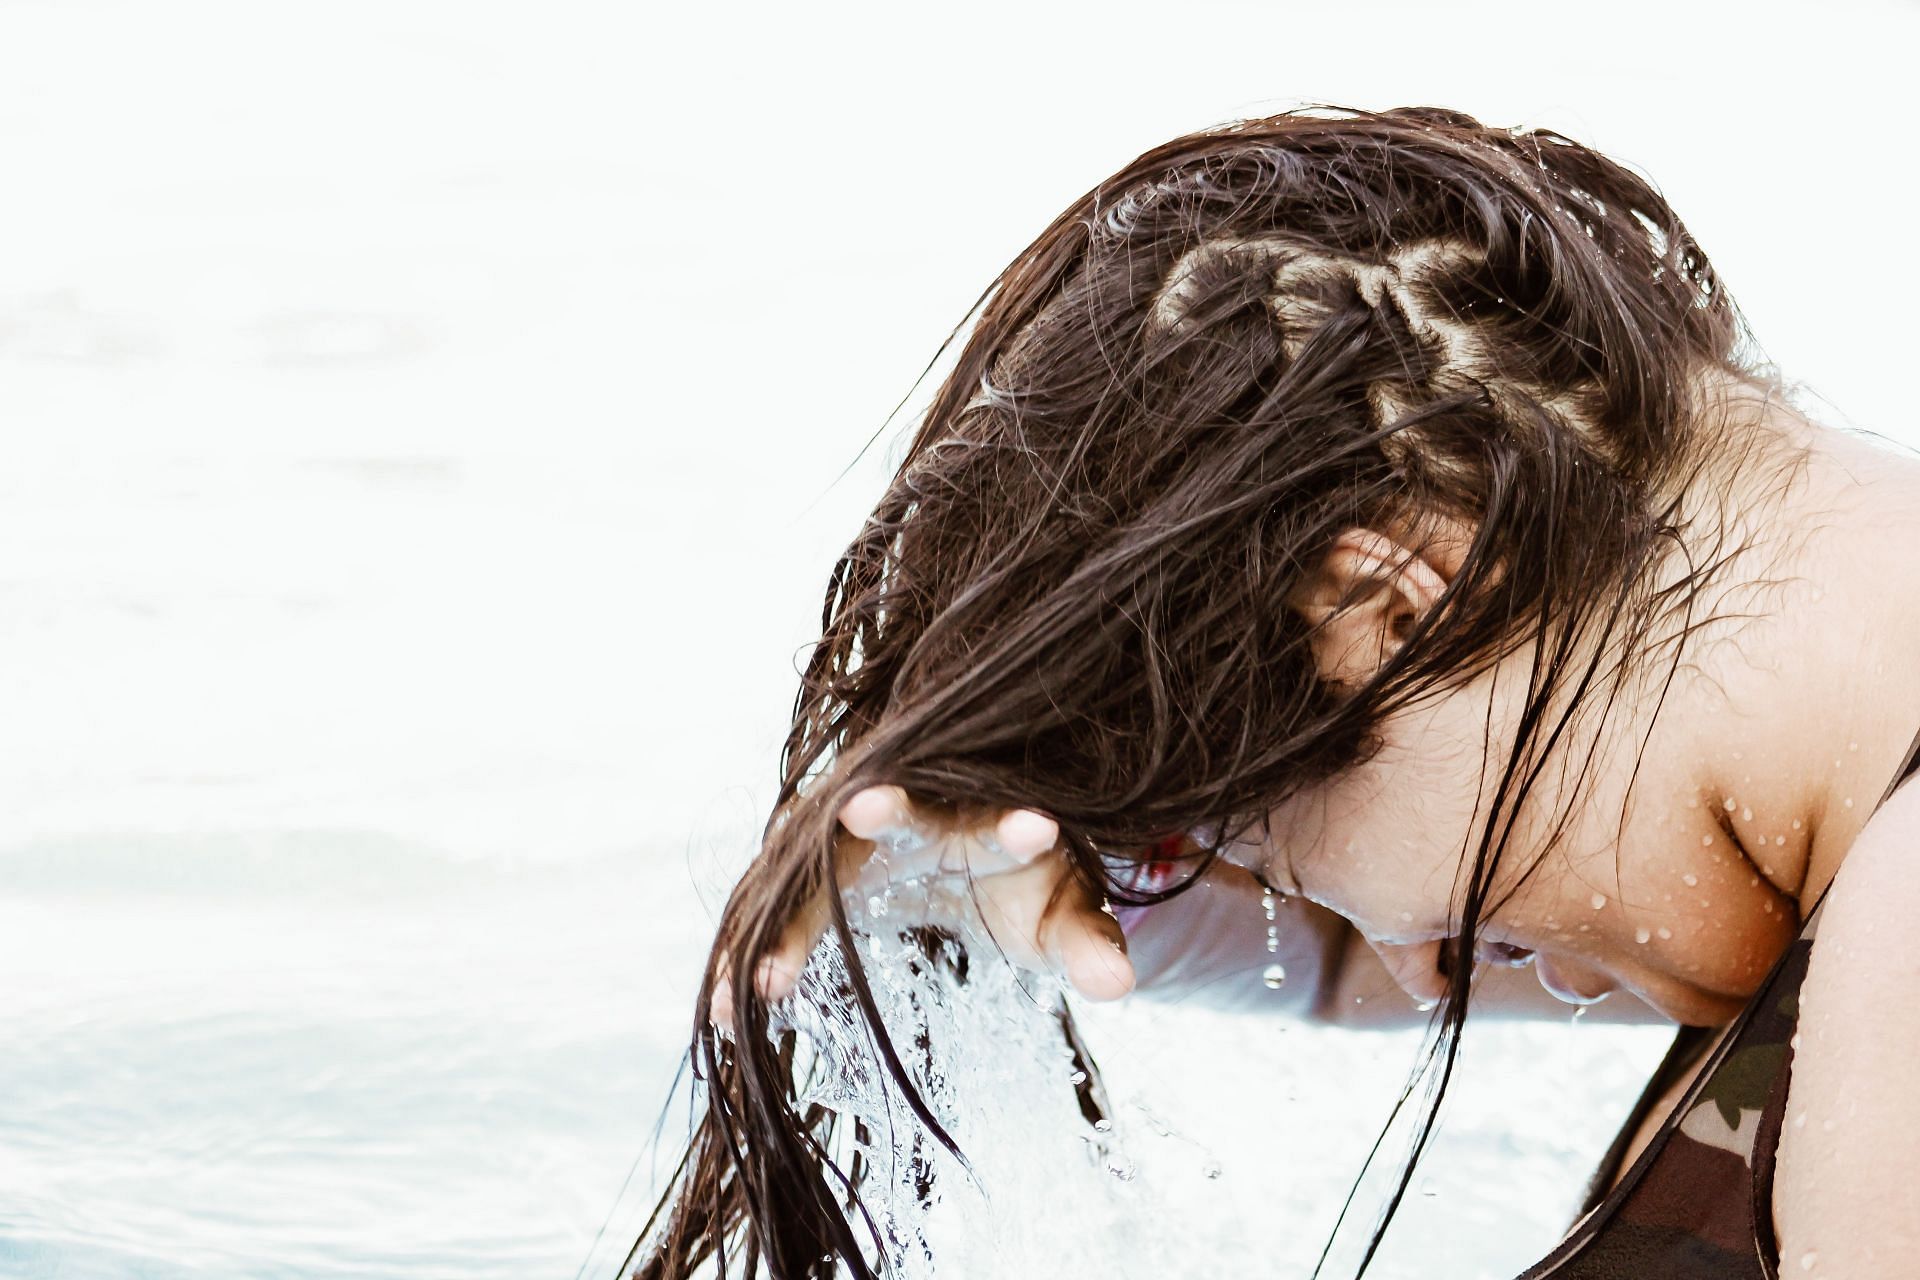 Scabby scalp can be caused due to infection. (Image via Unsplash / Erick Larregui)